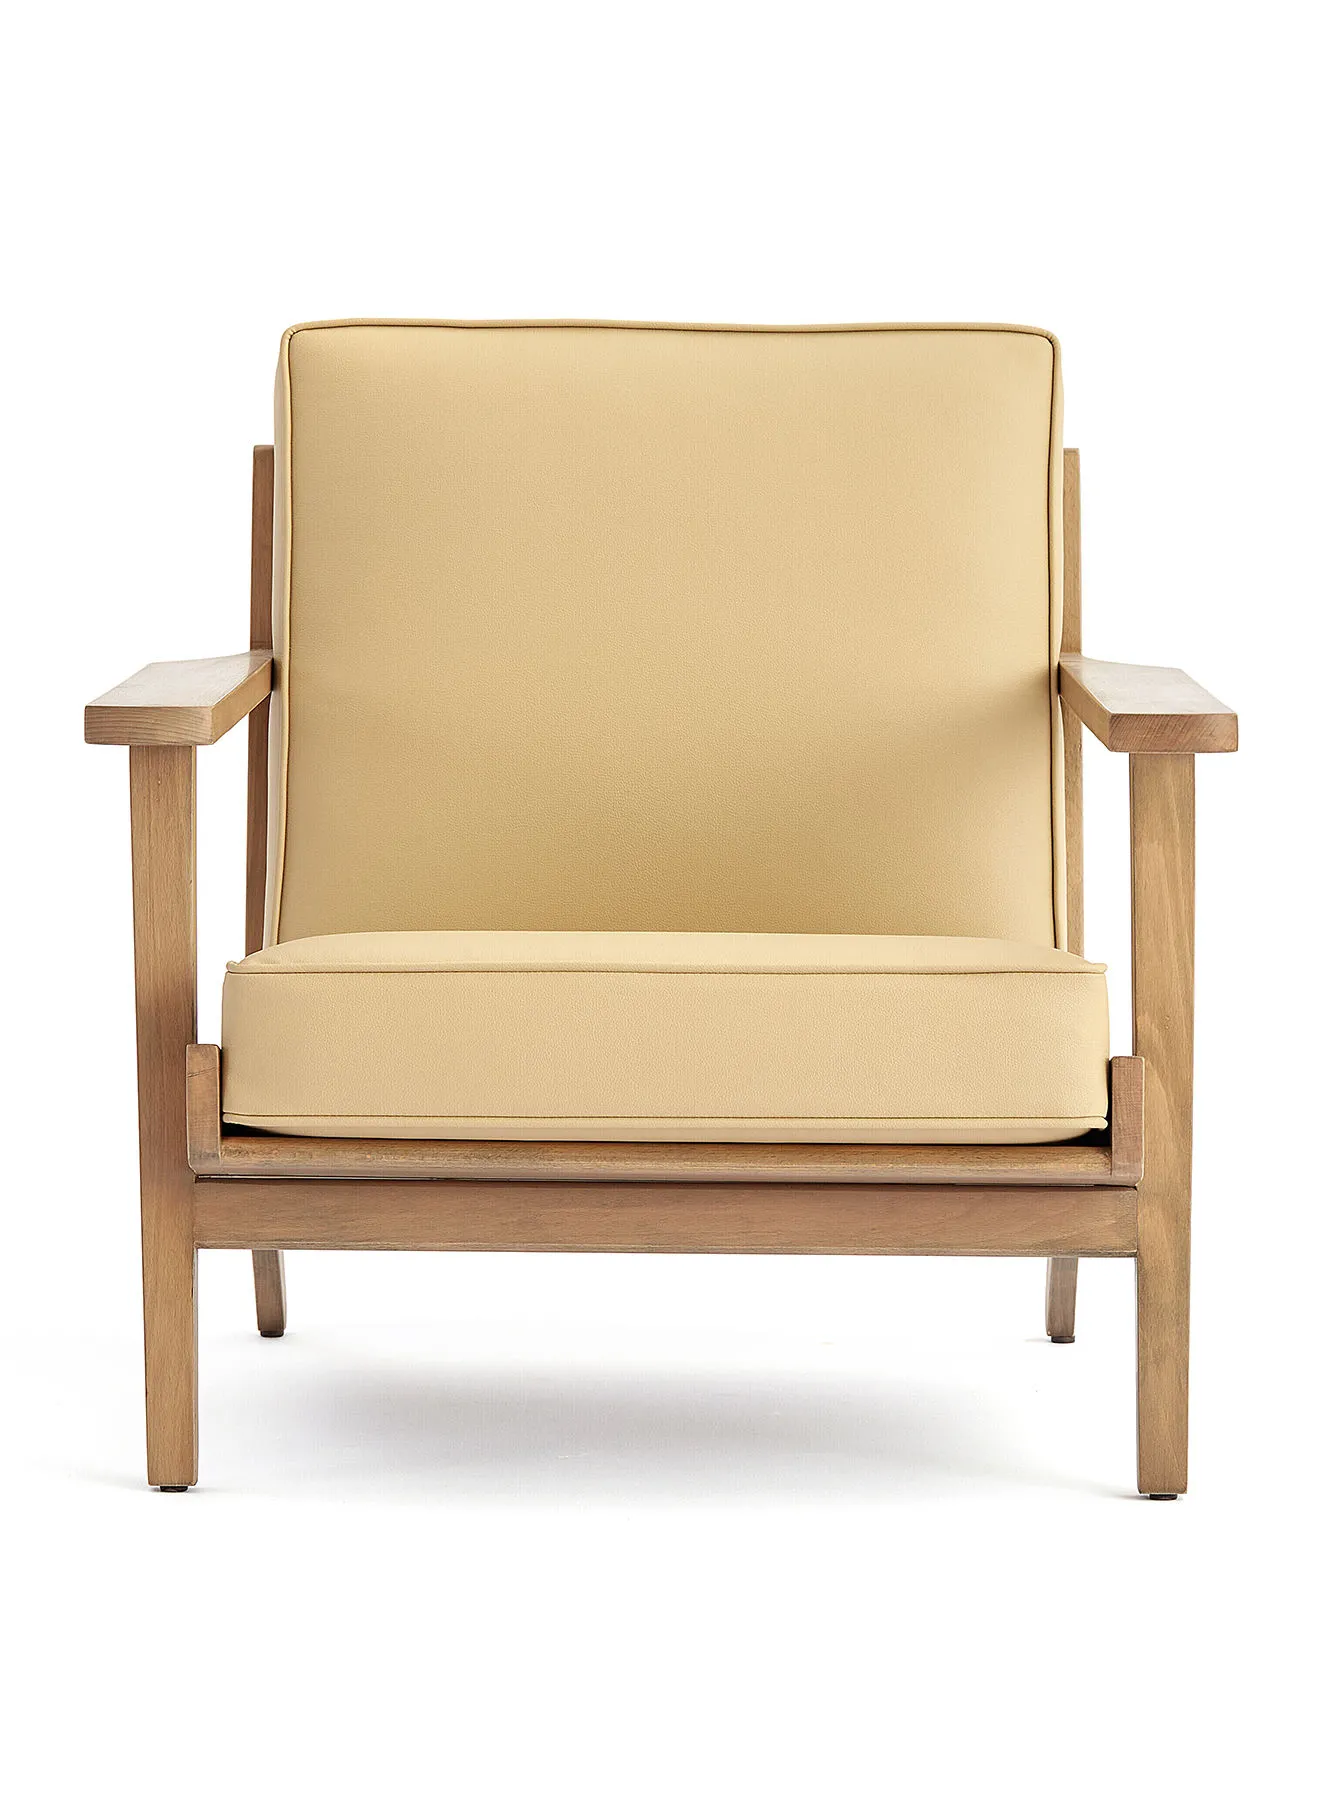 ebb & flow Armchair Luxurious - In Tan Wooden Chair Size 710 X 775 X 725